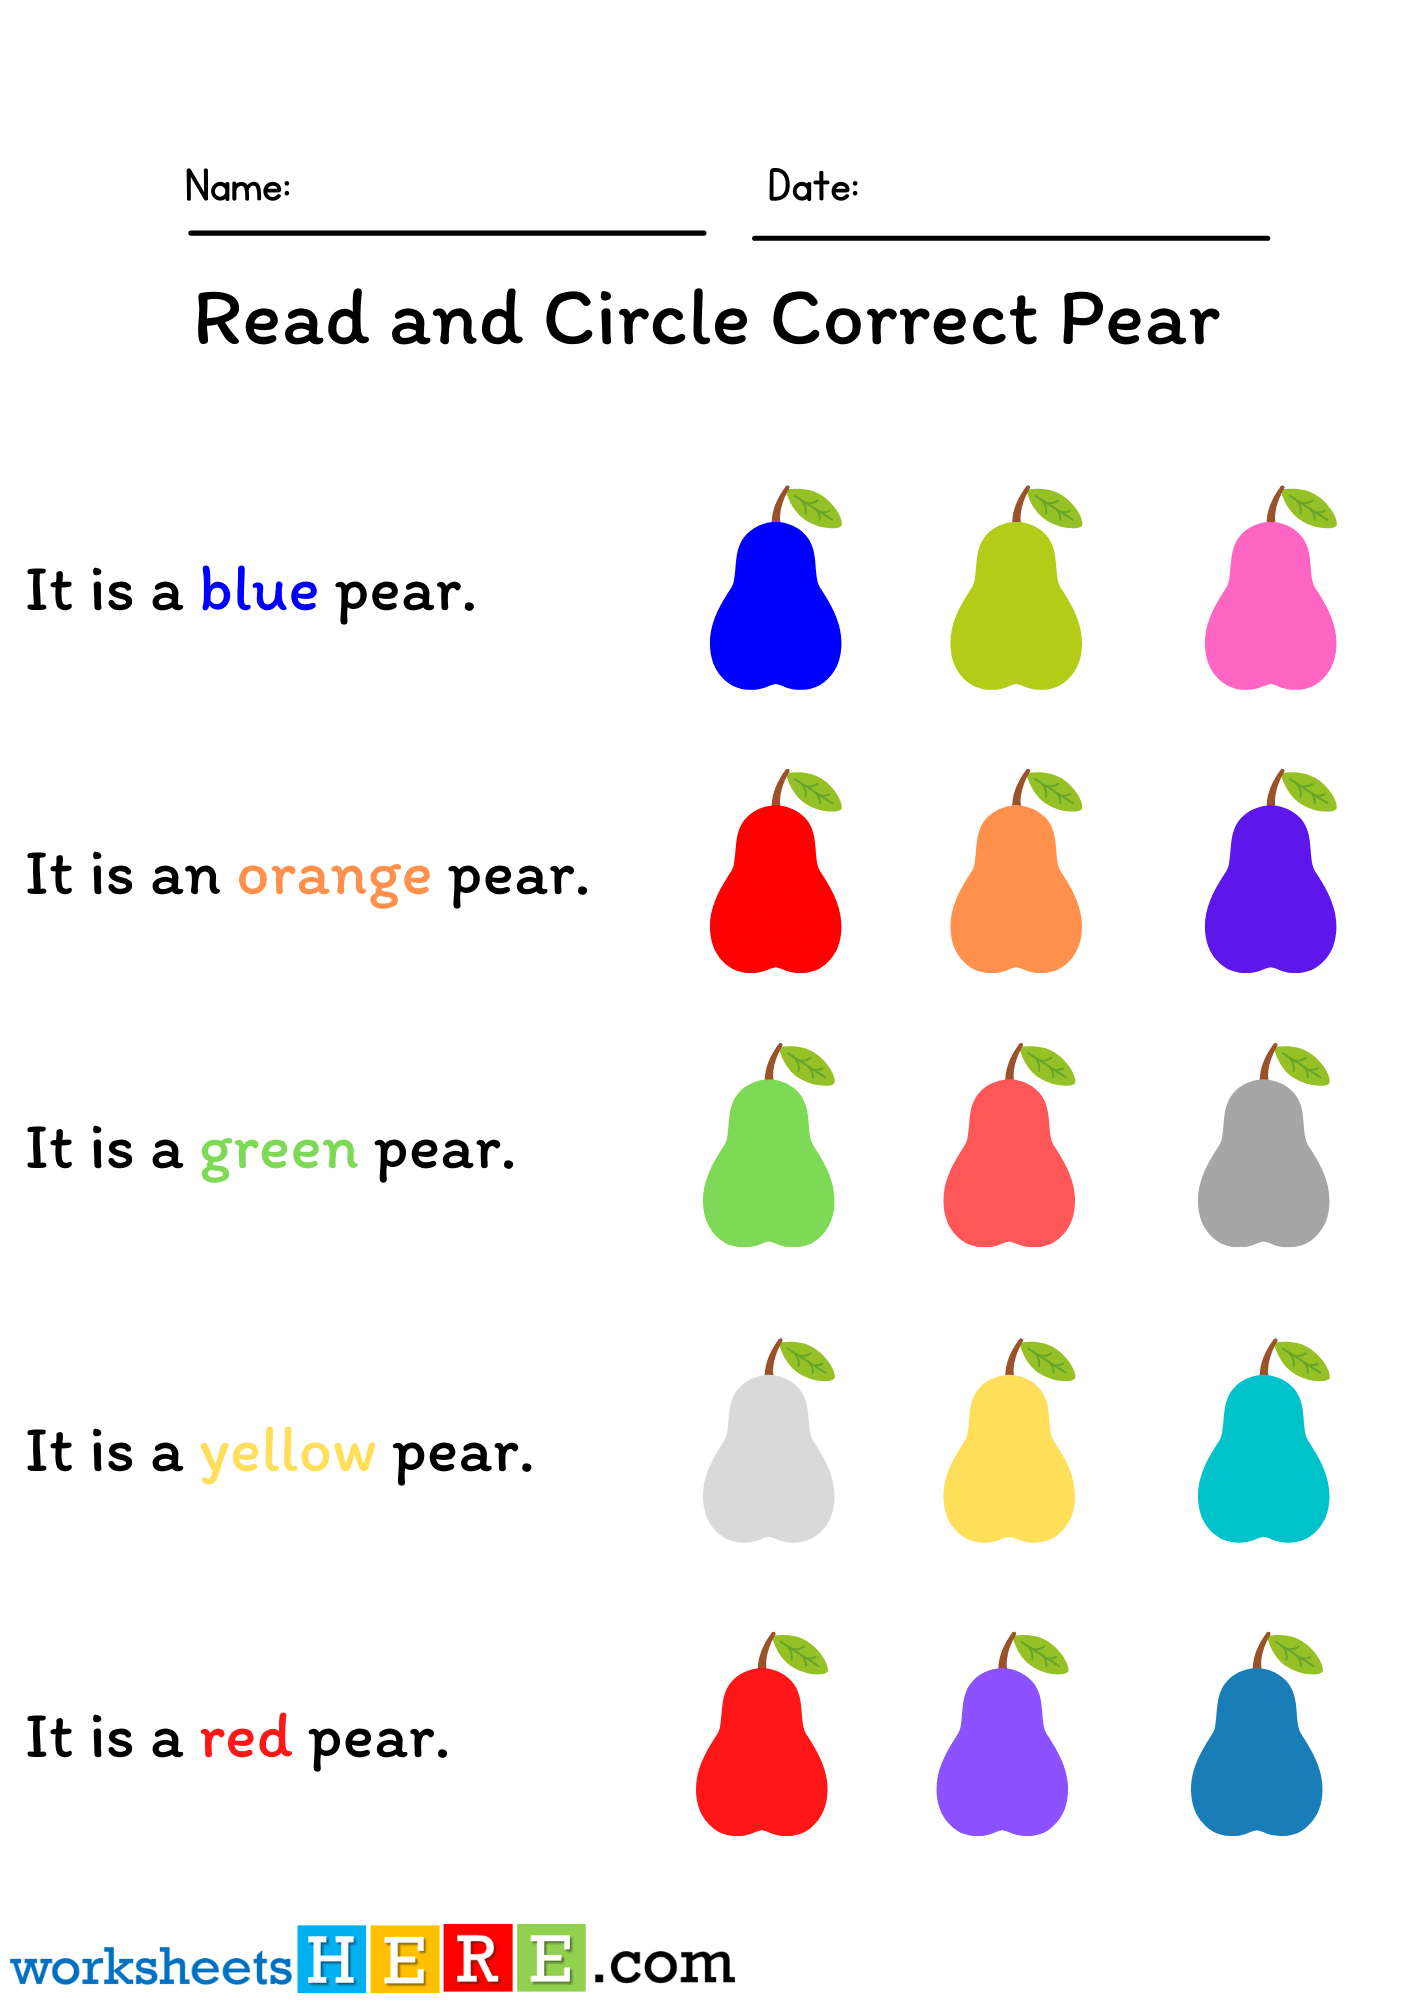 Read and Circle Correct Pear, Colors Activity PDF Worksheet For Kindergarten